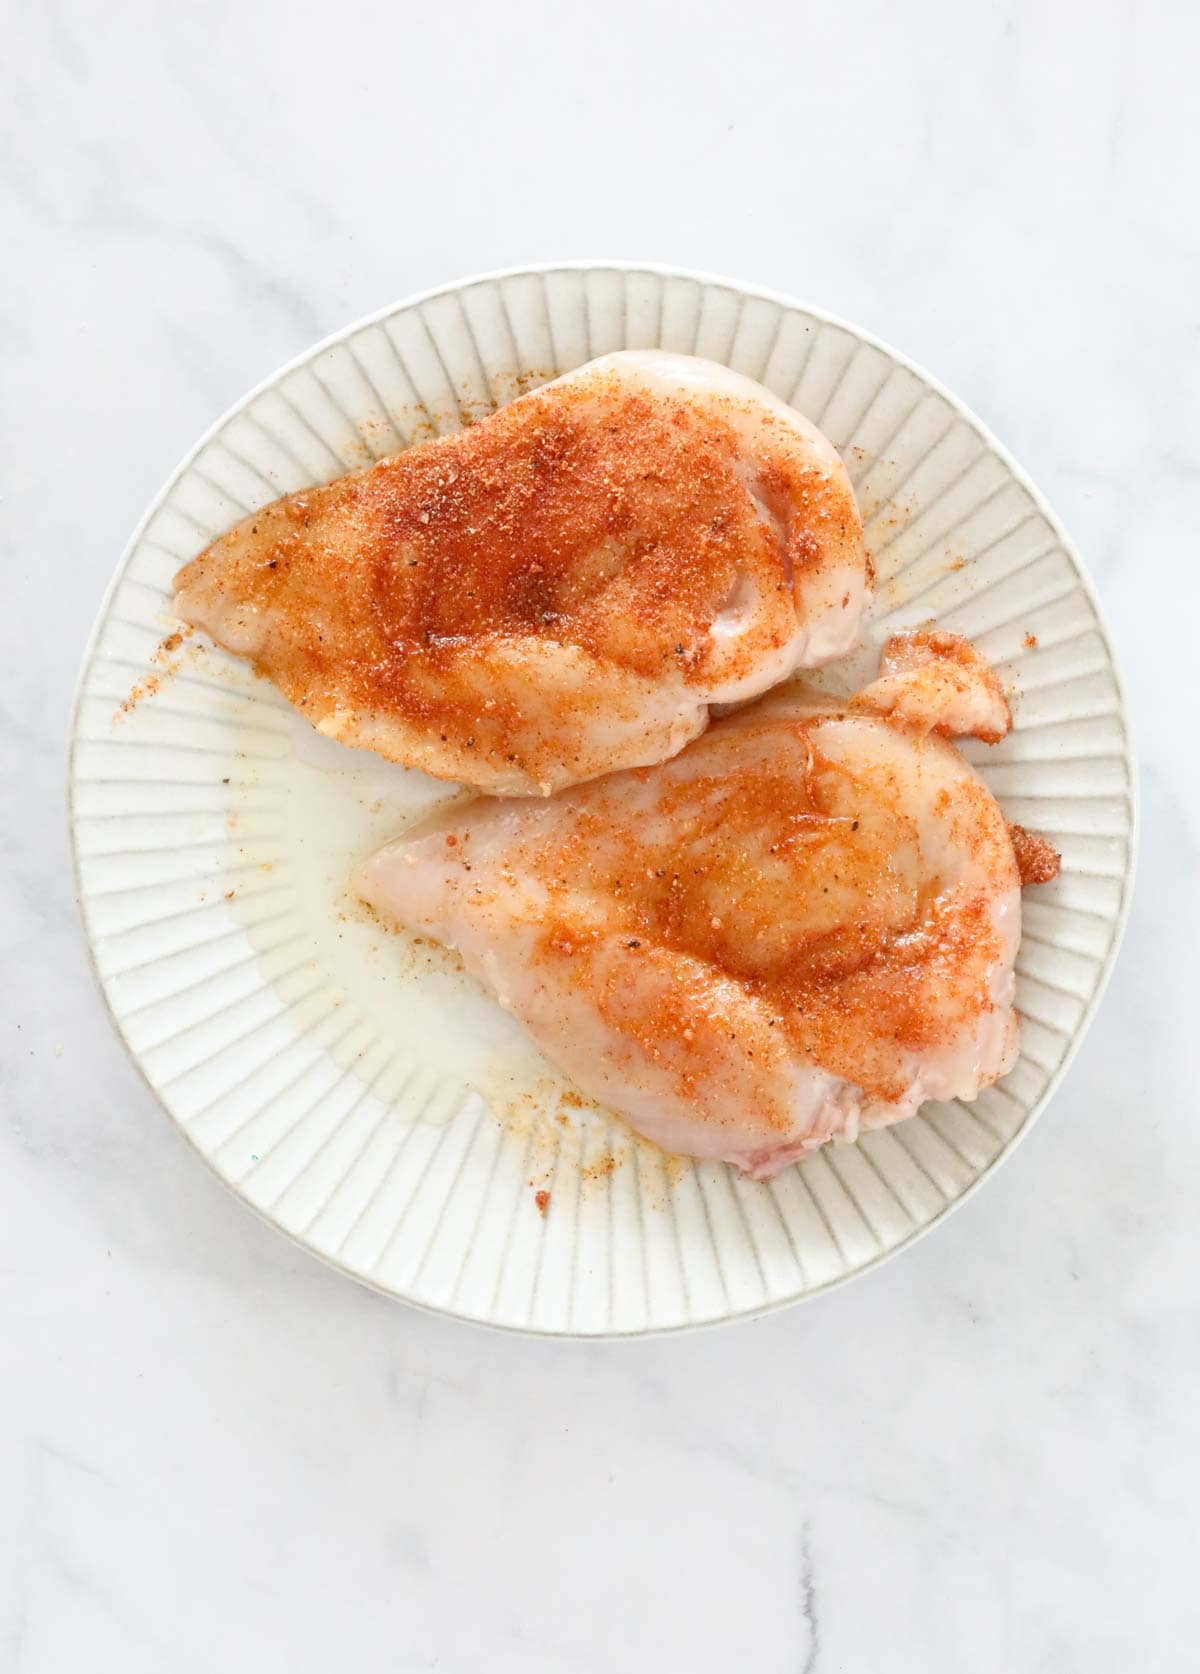 Two raw chicken breasts on a plate, rubbed with the spice mix.